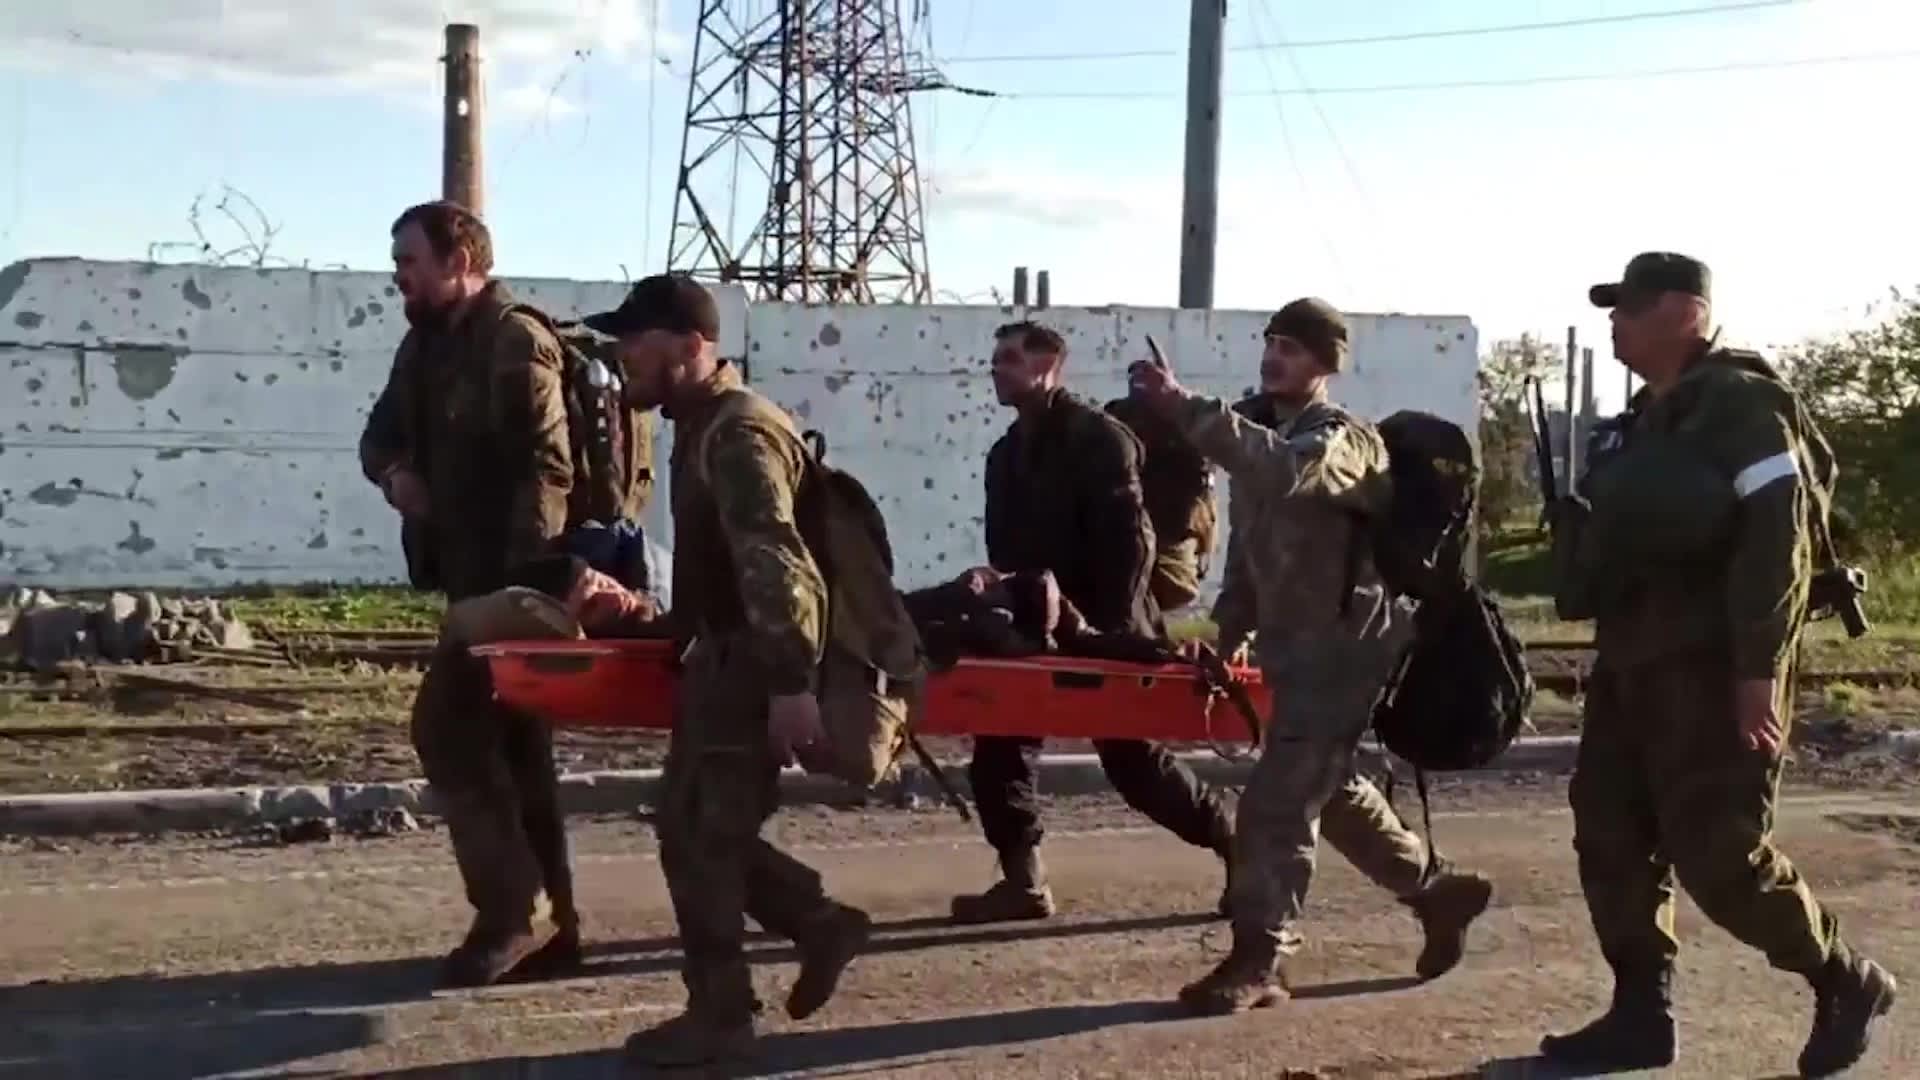 A screen grab taken from a video released by Russian Defense Ministry shows Ukrainian soldiers are being evacuated from Azovstal steel plant in the port city of Mariupol, Ukraine on May 17, 2022.